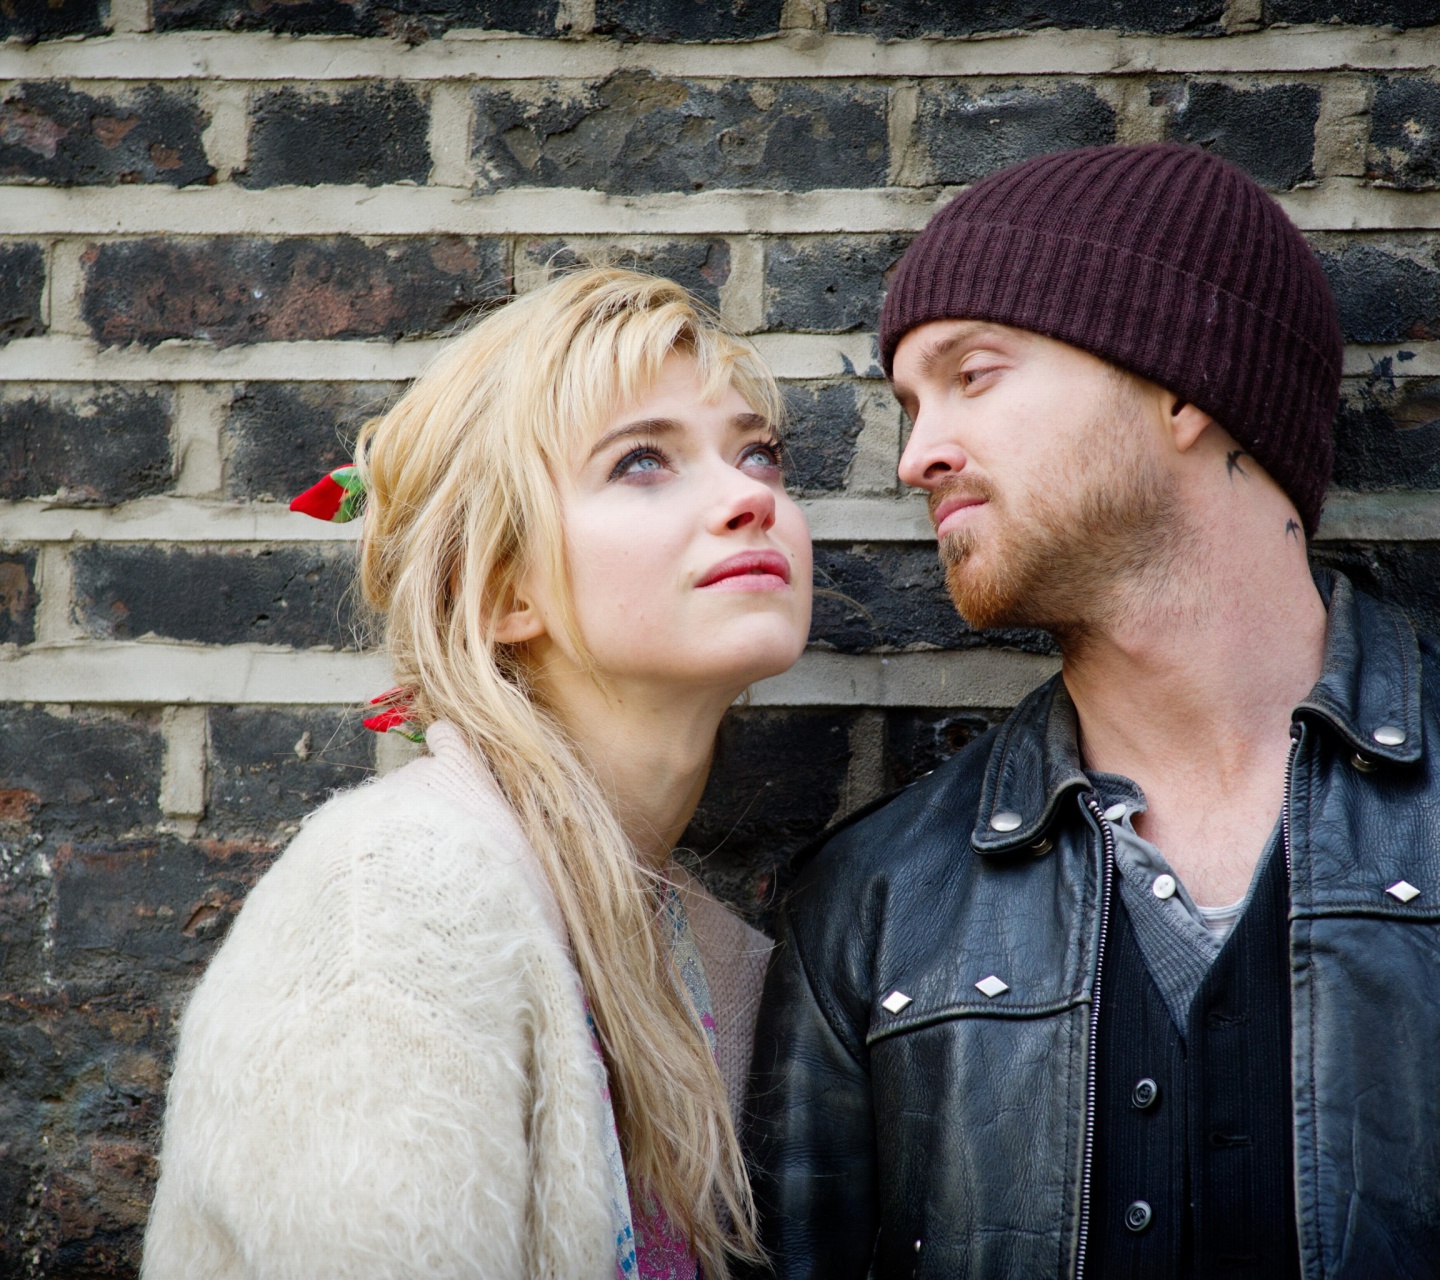 A Long Way Down with Aaron Paul and Imogen Poots screenshot #1 1440x1280